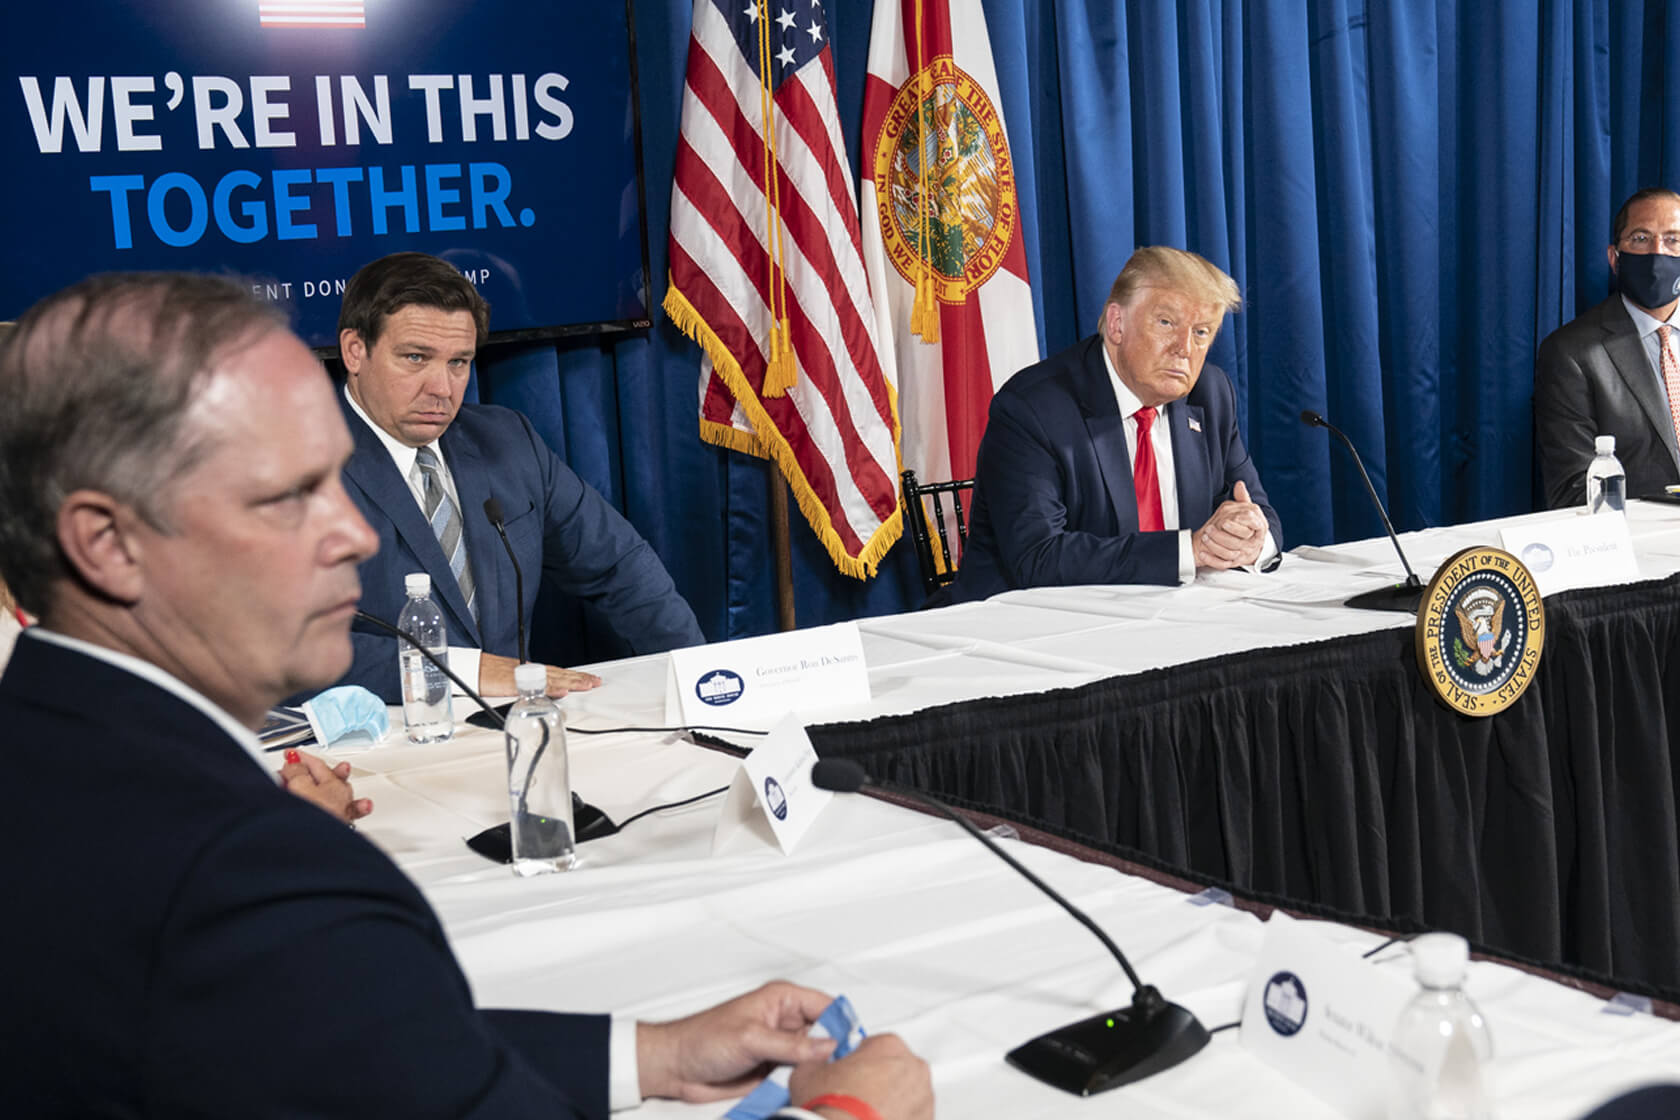 Image Ron DeSantis with Donald Trump at a Covid event in Florida in July 2020.